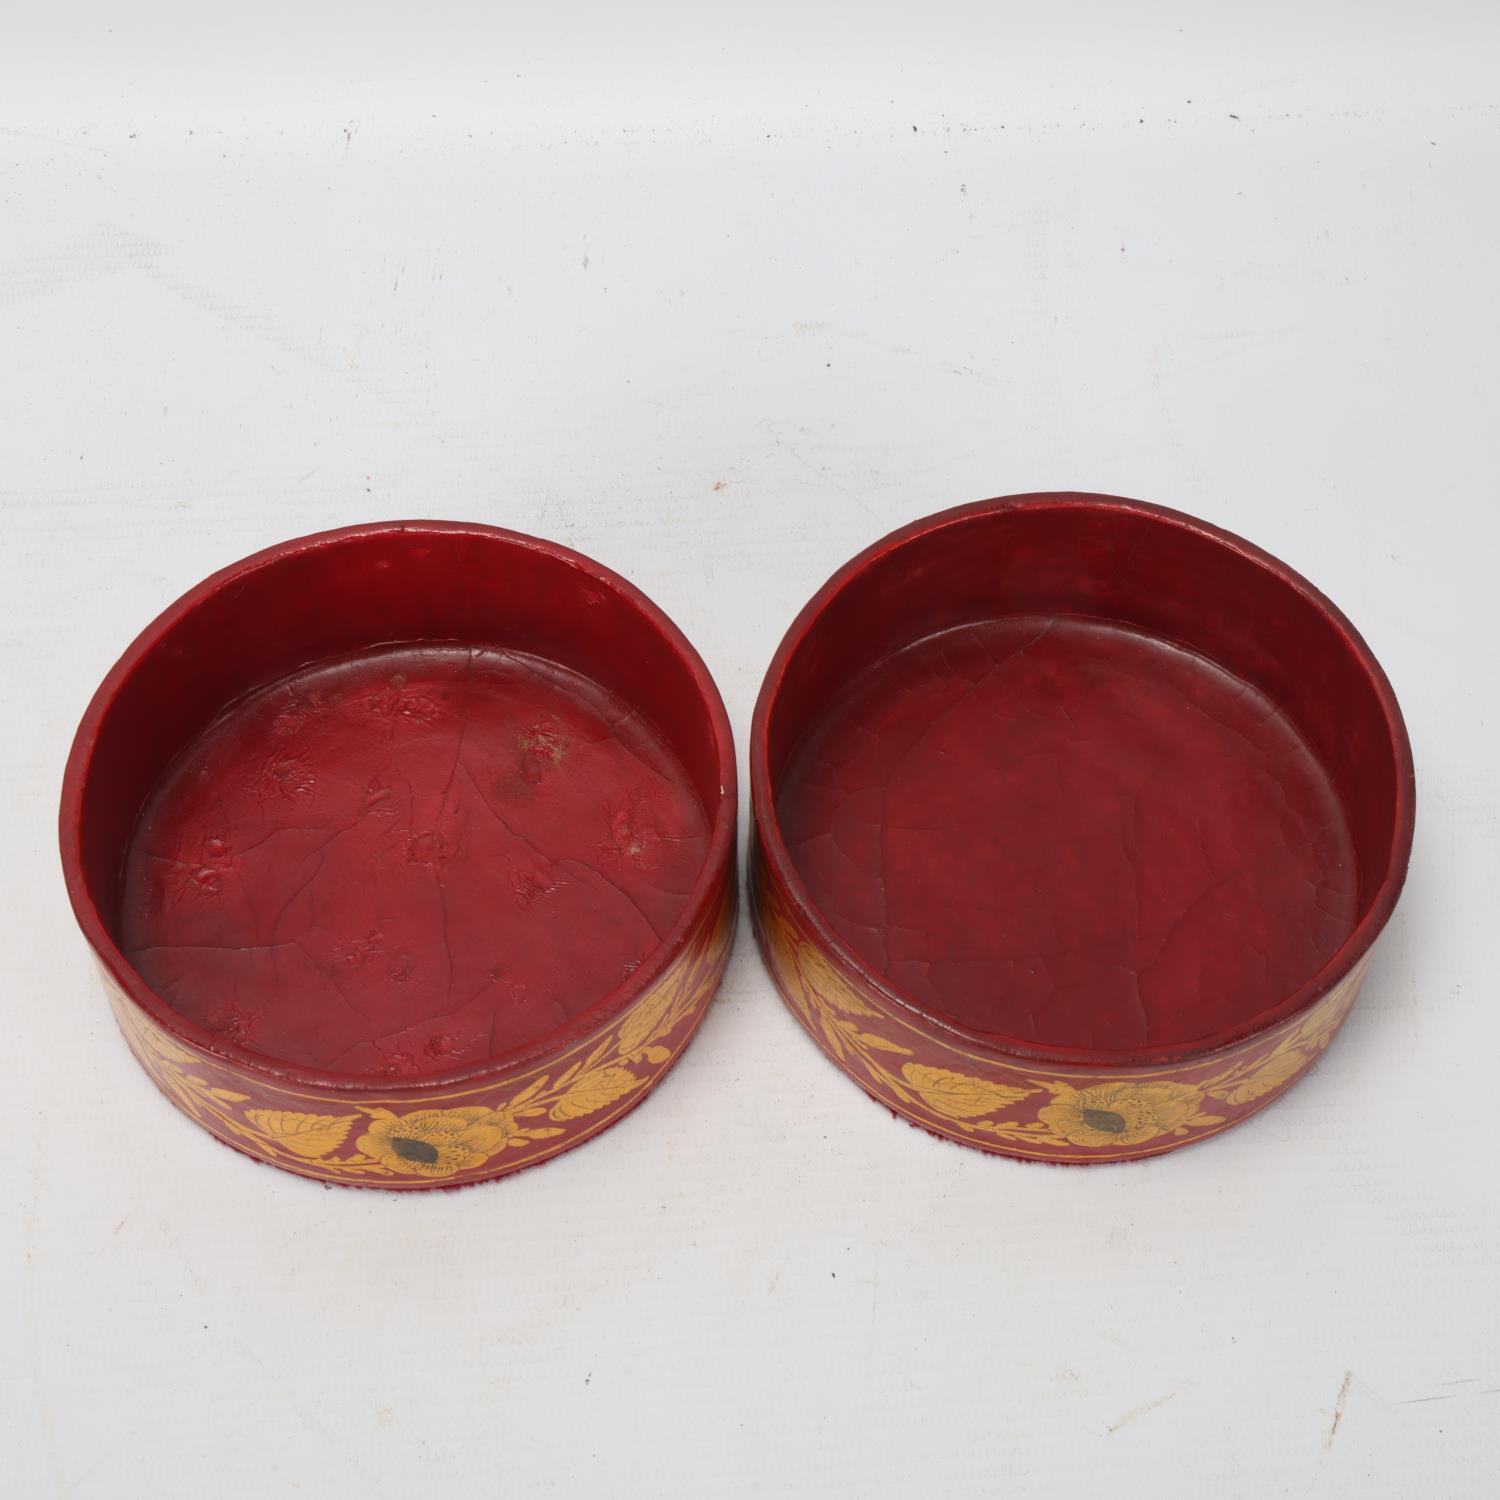 Pair of Regency red lacquer and hand painted gilt decorated papier mache wine bottle coasters, circa - Image 2 of 3